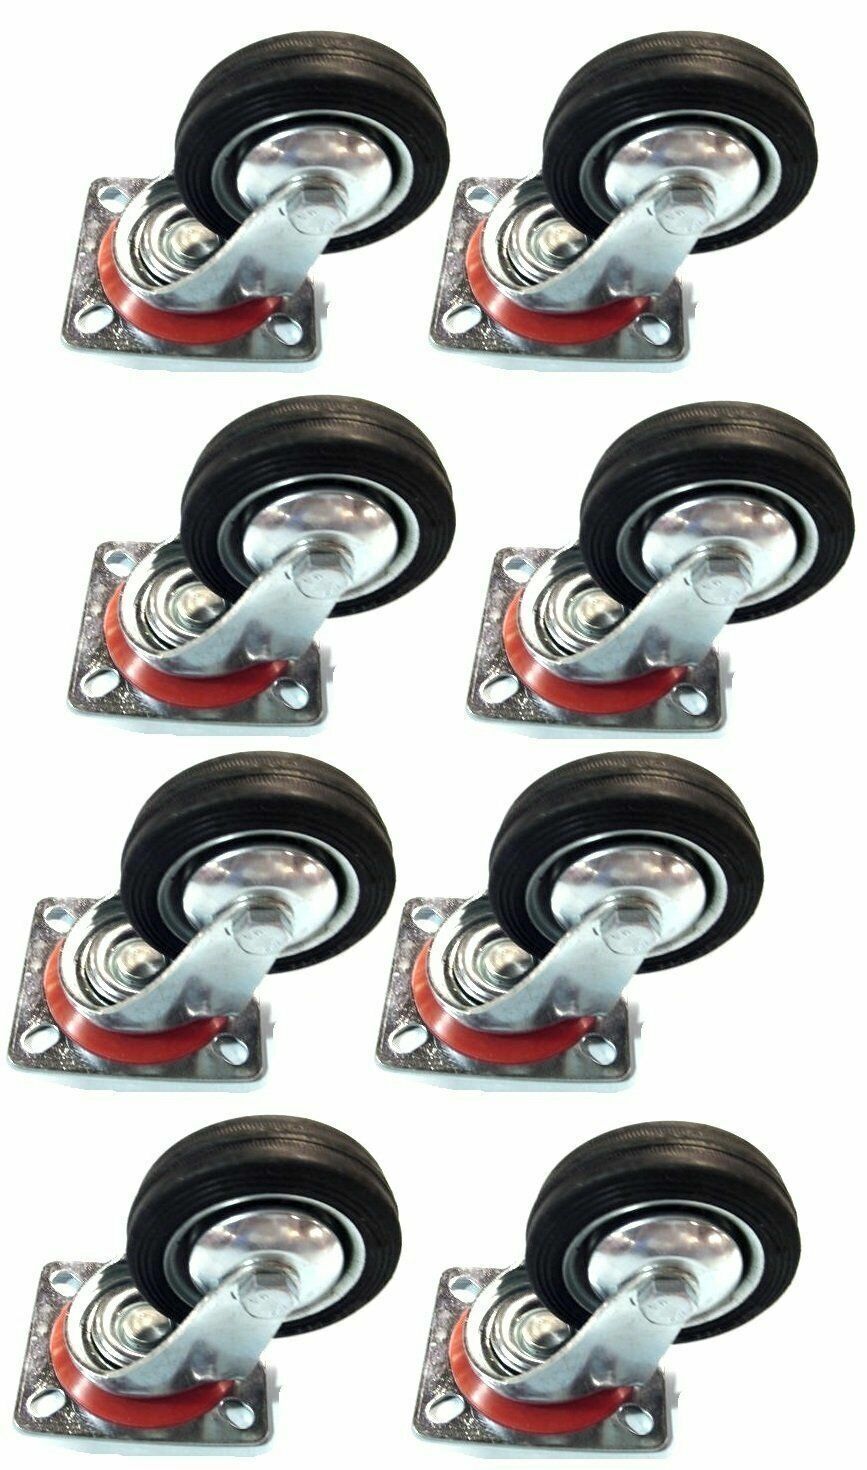 8 pack 3" Swivel Caster Wheels Rubber Base with Top Plate & 